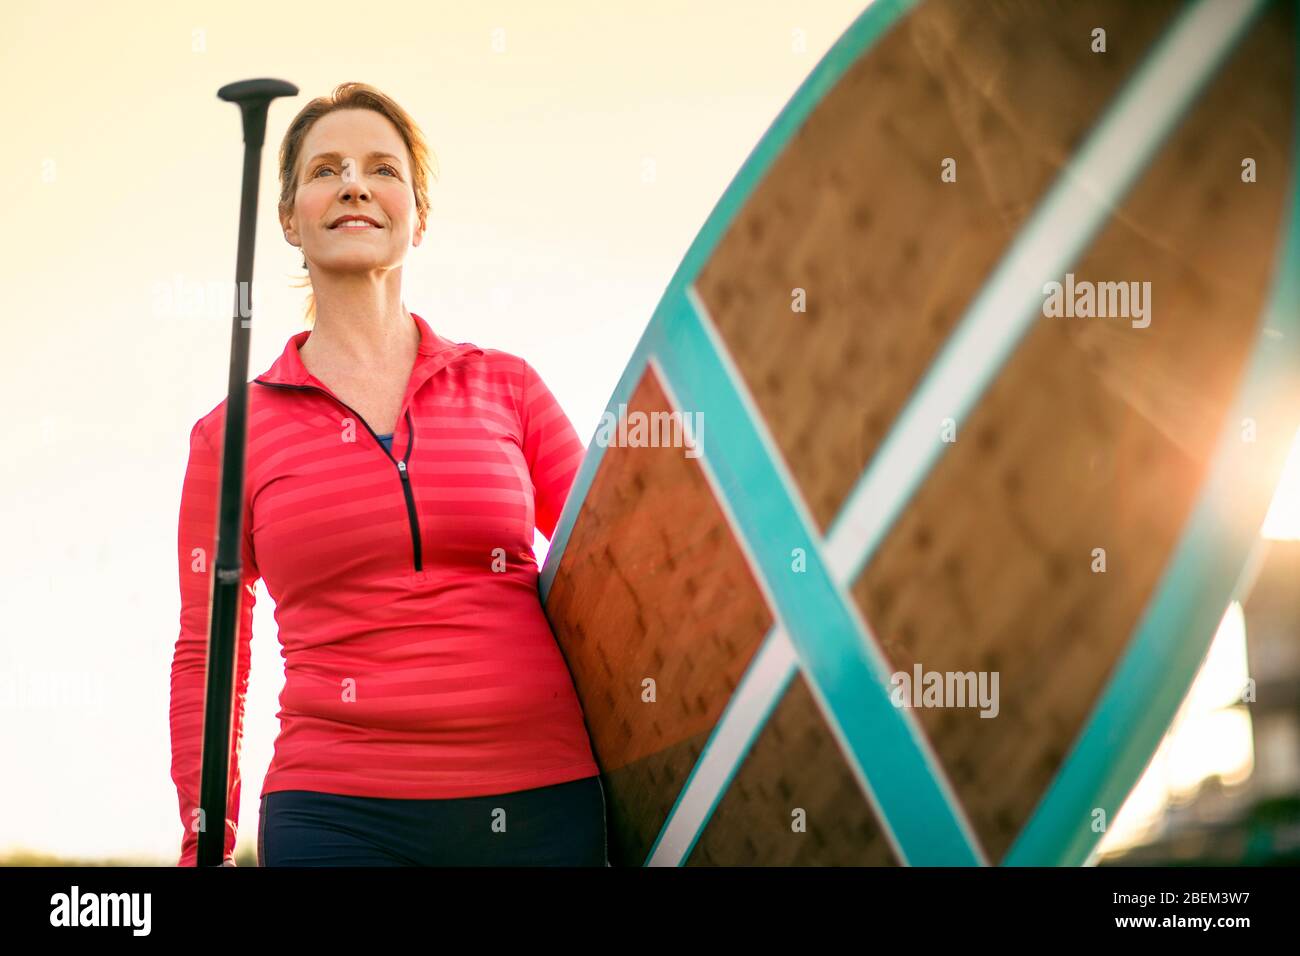 Mid adult woman walking with a paddleboard Stock Photo